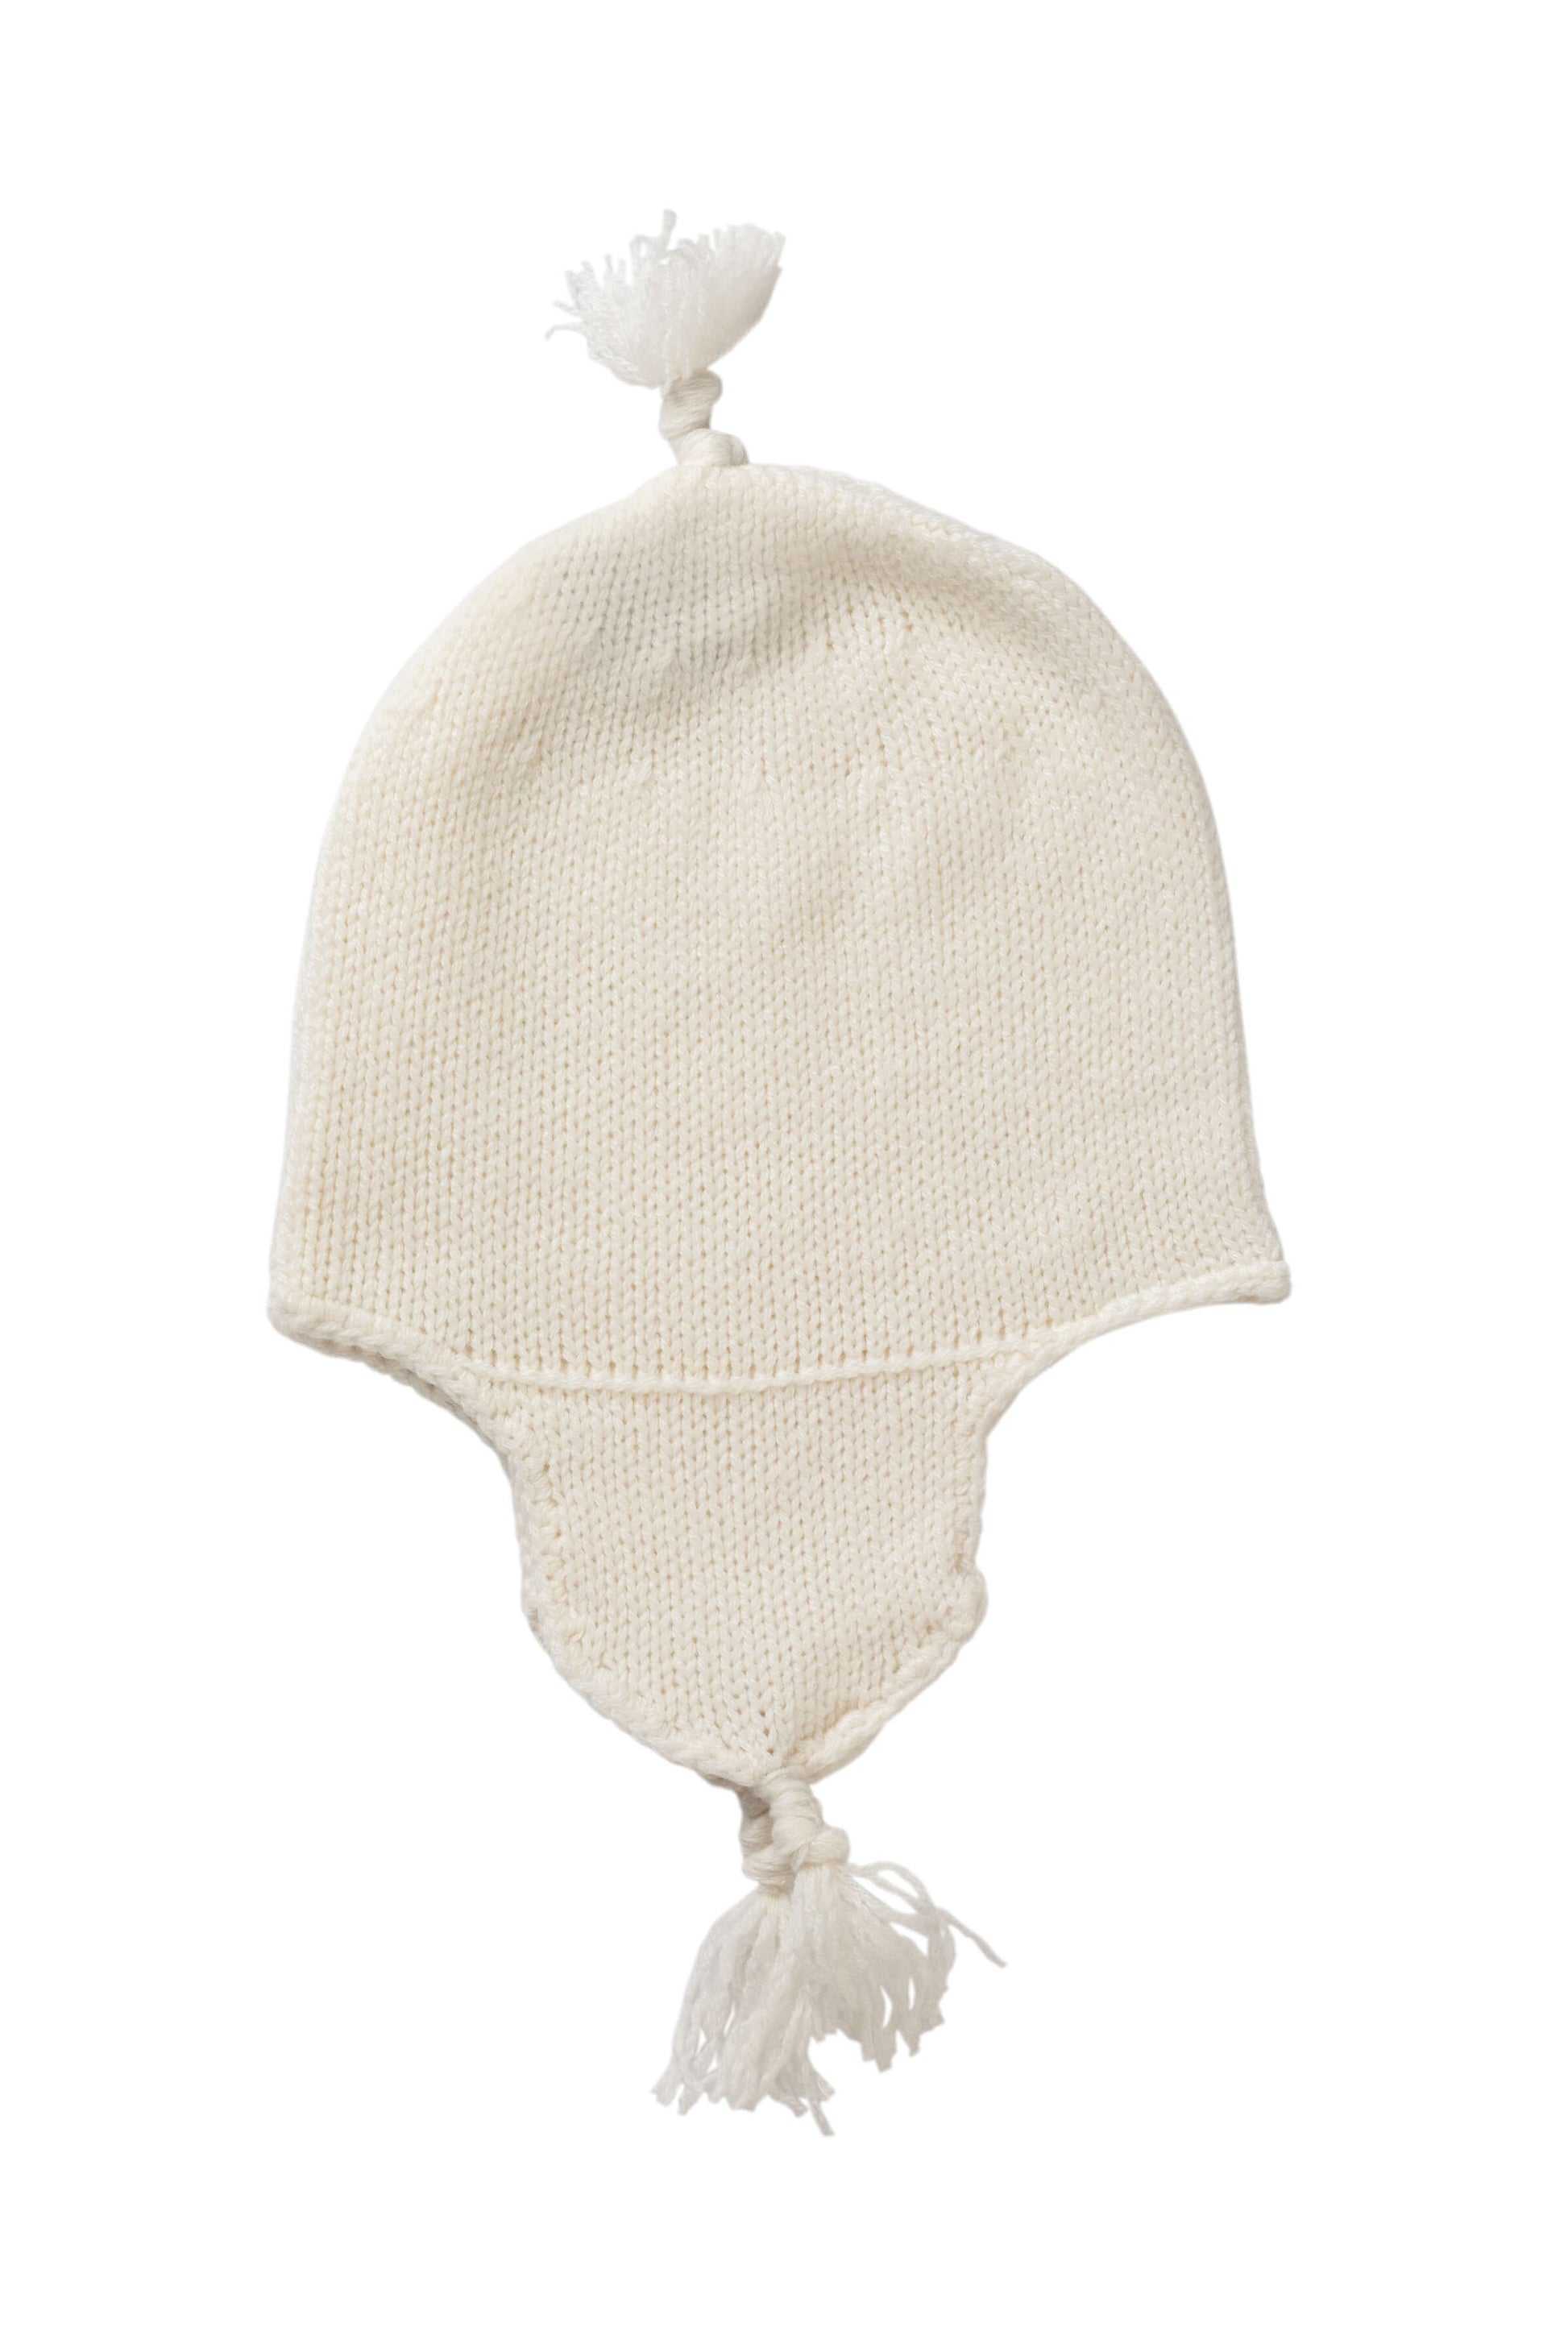 Johnstons of Elgin Baby Handknits Ecru Cashmere Baby Hat with Tassel Gift Set AW21GIFTSET19A